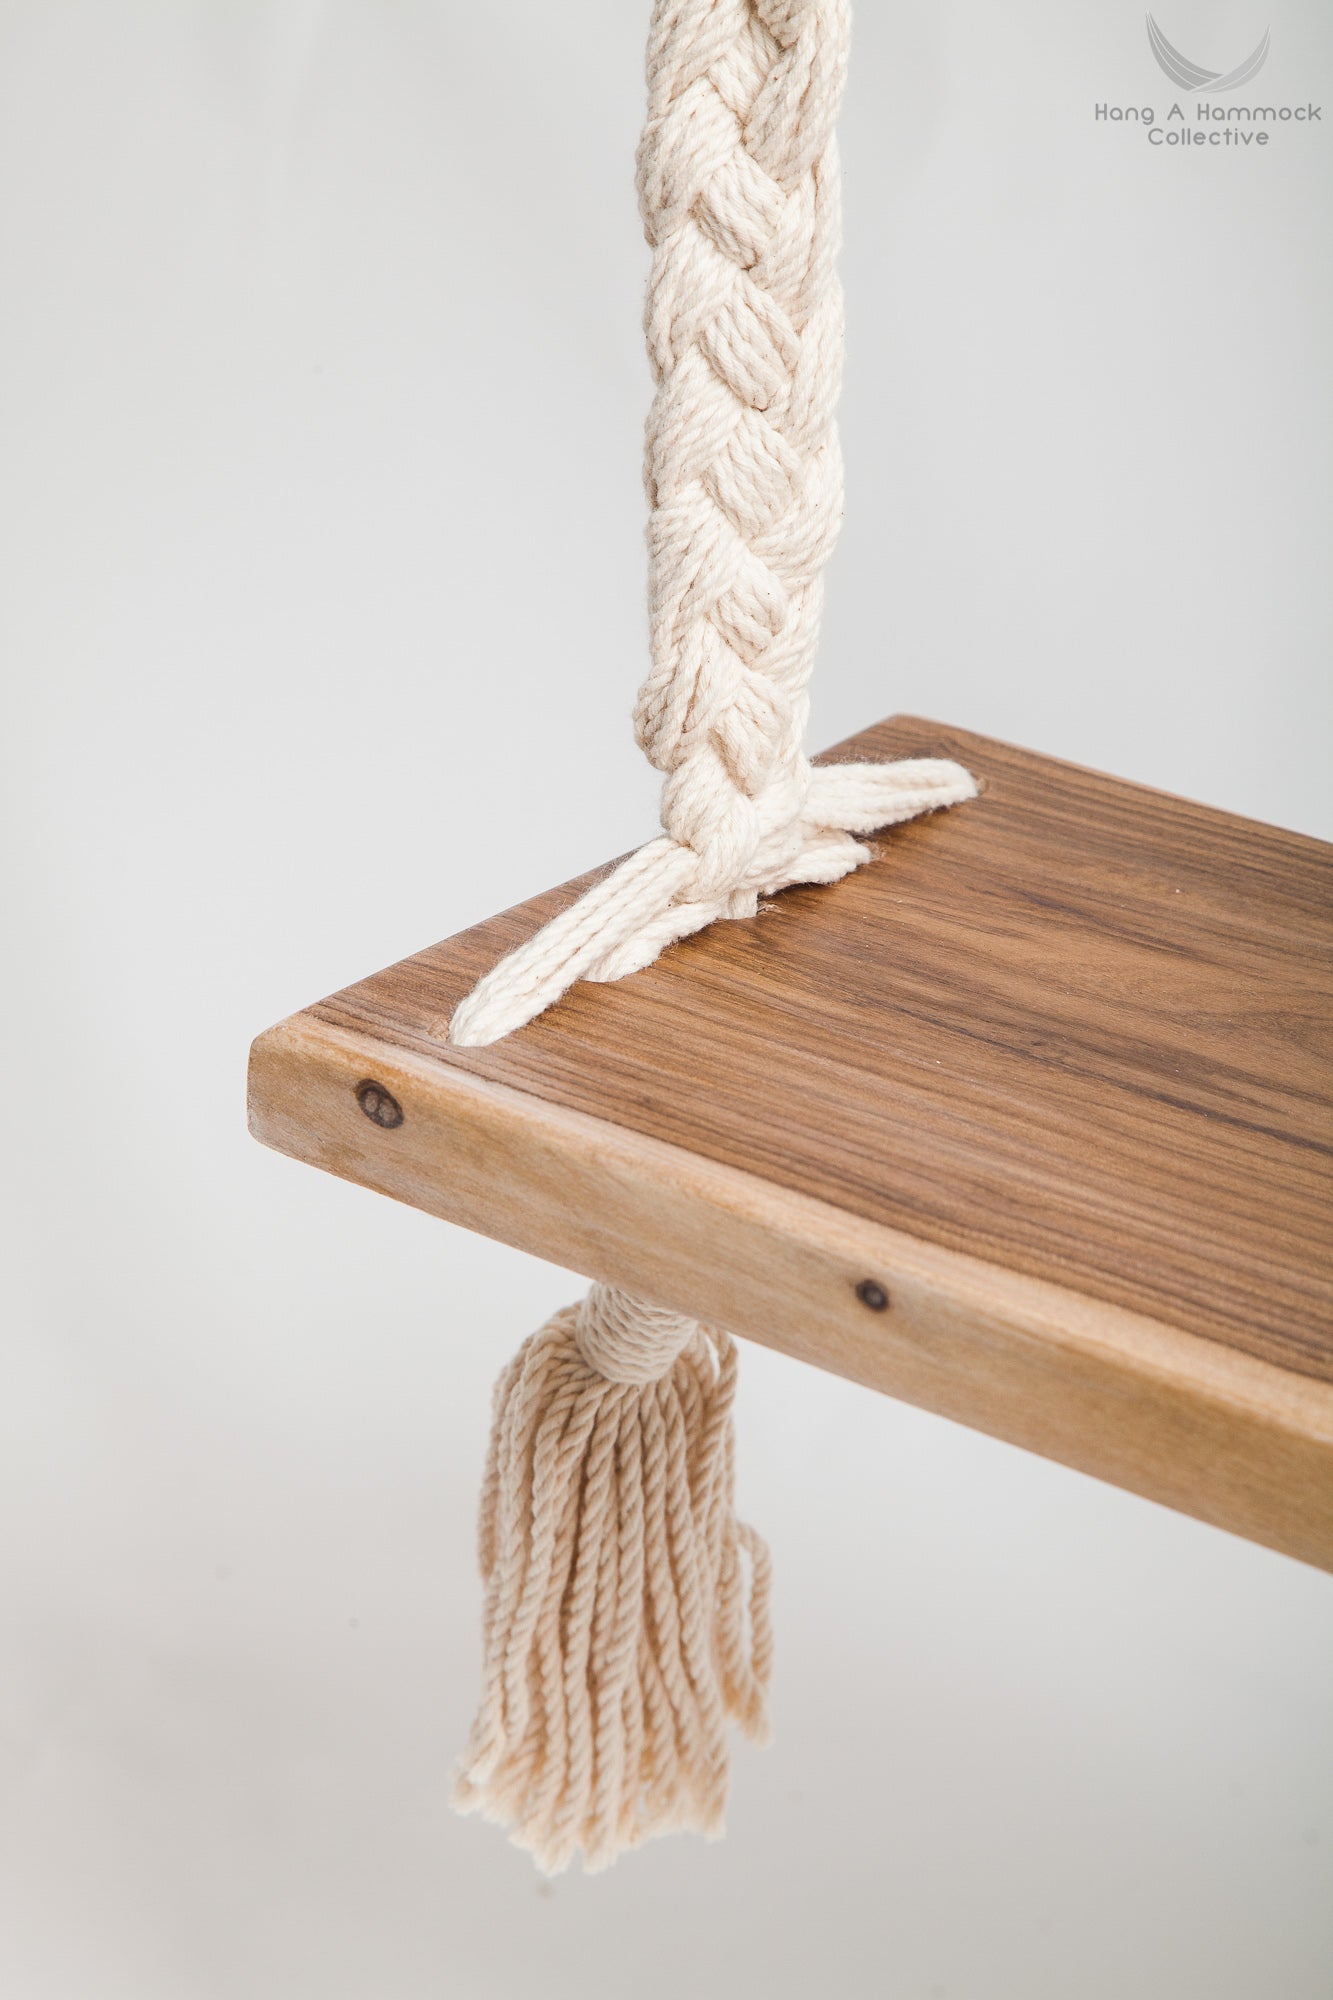 Braided Rope Swing - detail of the timber seat - white background